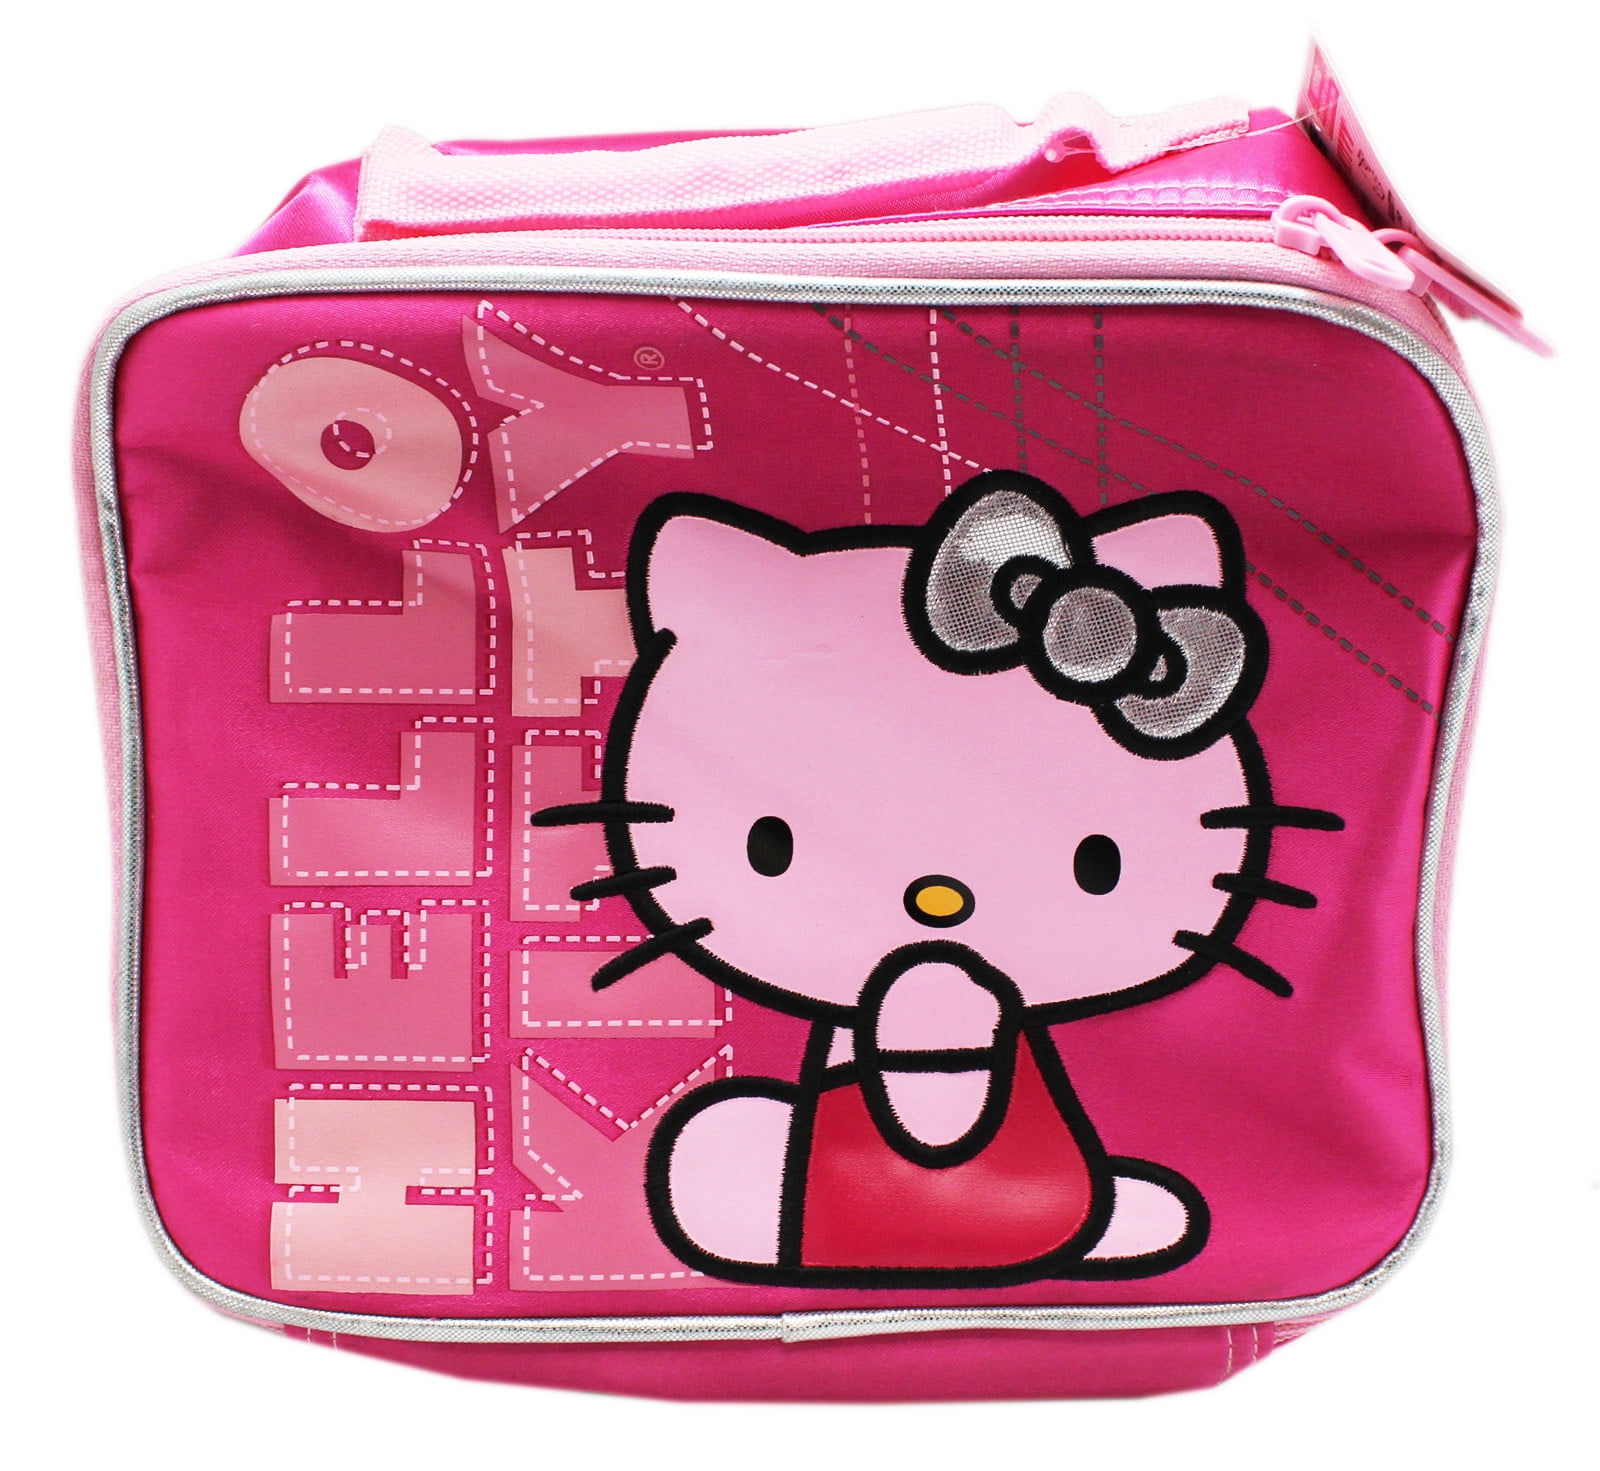 Sanrio Hello Kitty Fullbody Square 9" Canvas Pink Grils Lunch Bag/Box-0760 